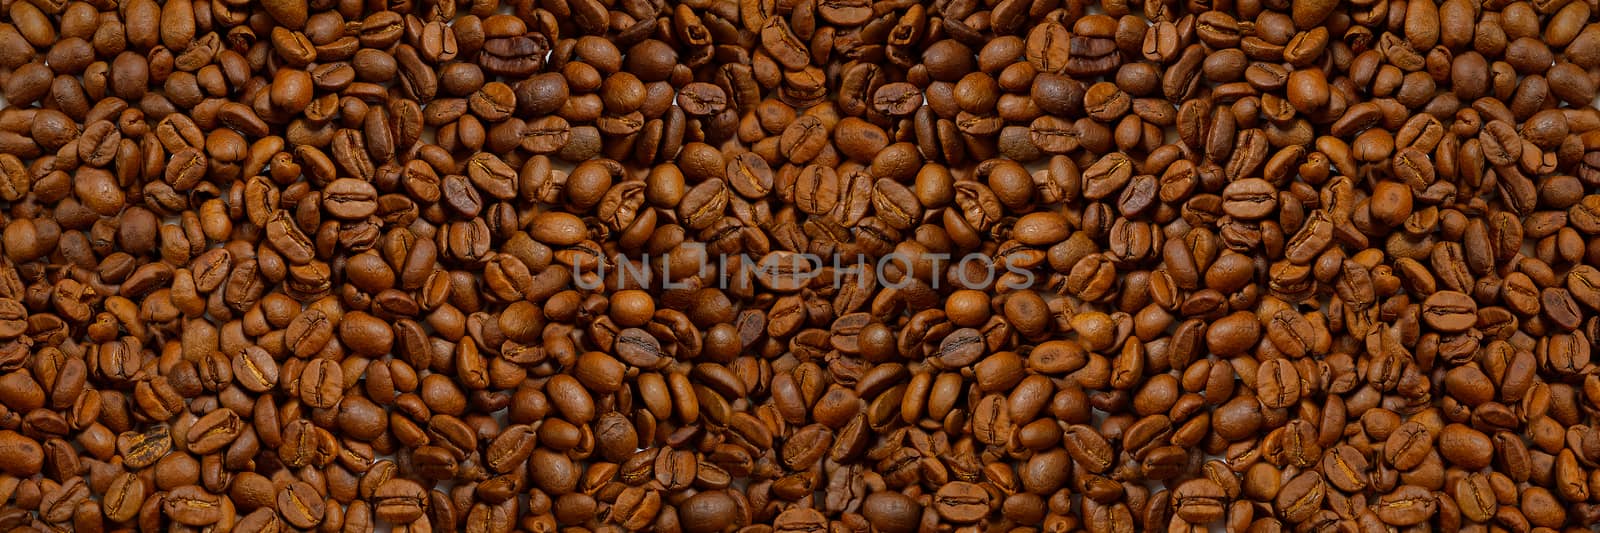 Roasted coffee beans banner background. brown coffe beans texture bpanoramic banner. by PhotoTime